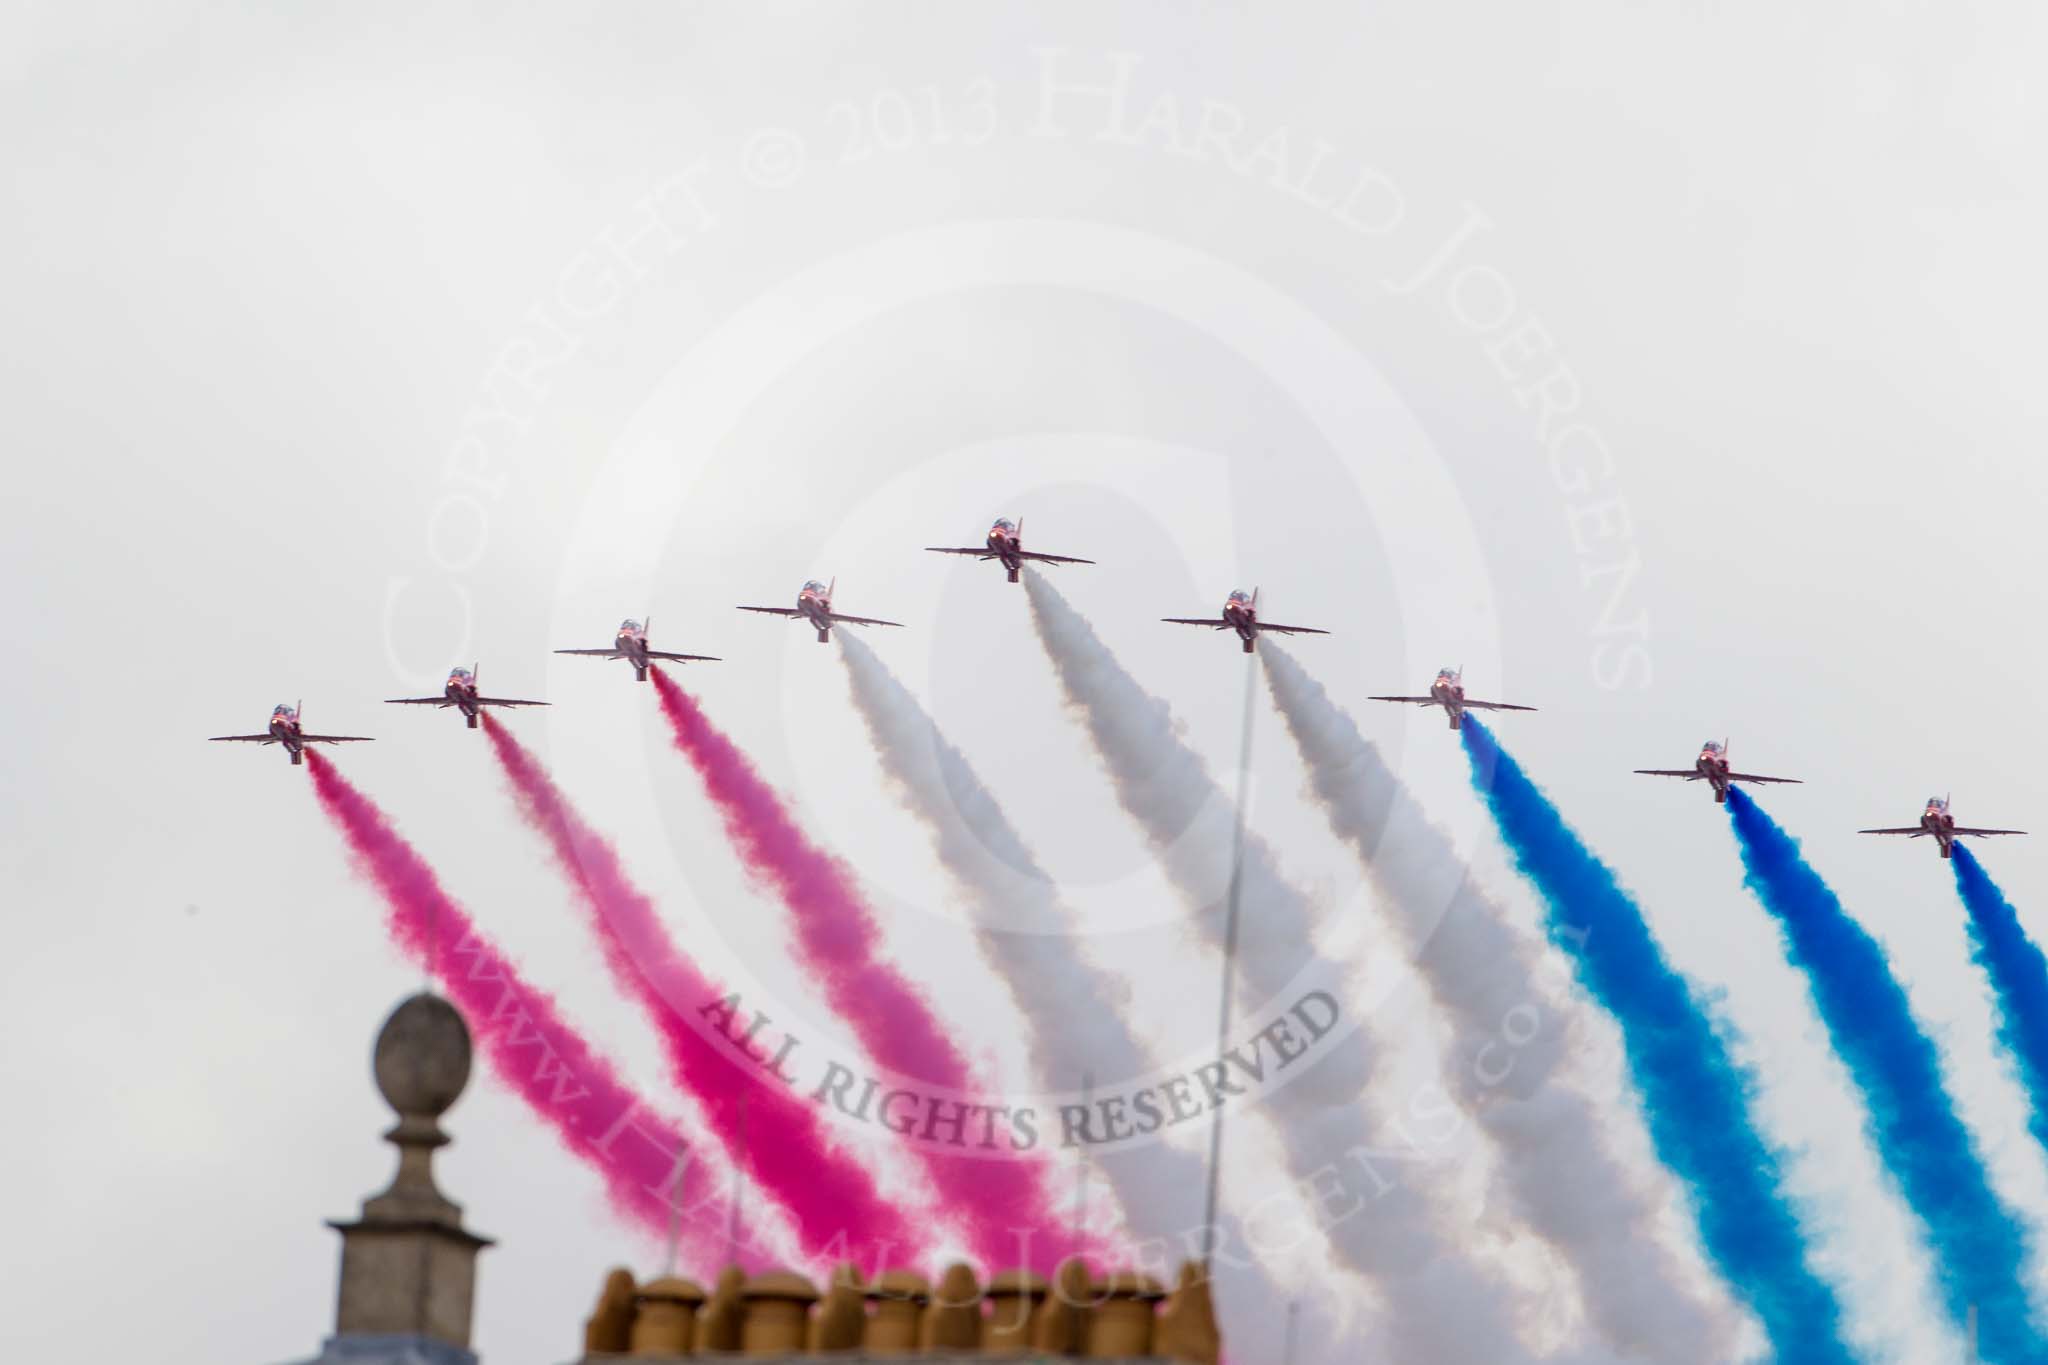 Trooping the Colour 2013: The RAF Flypast - the Red Arrows, red, white and blue smoke!. Image #925, 15 June 2013 13:03 Horse Guards Parade, London, UK